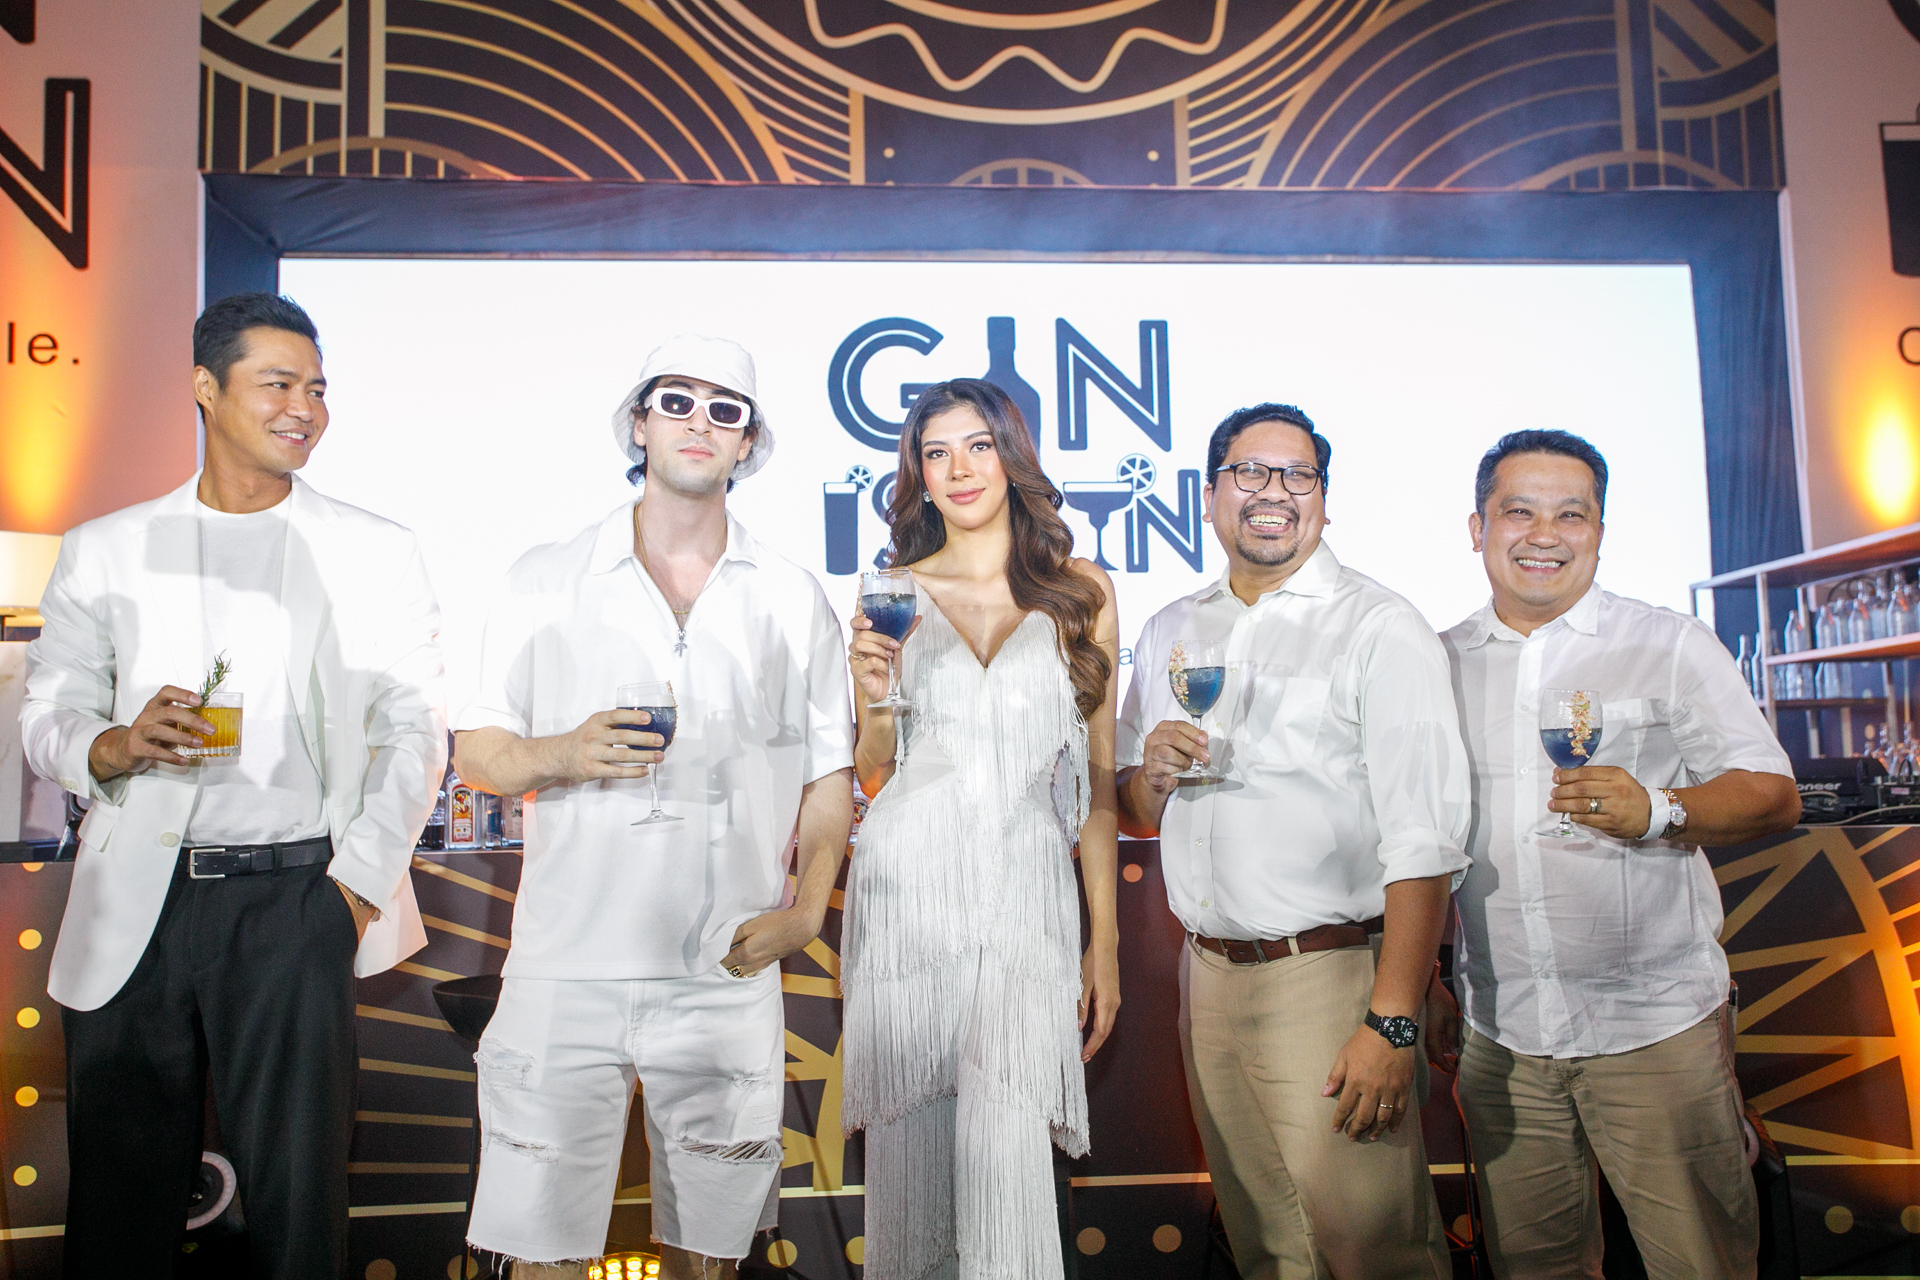 It's a ‘Cool, Clear, and Versatile’ quality of Ginebra Gin in celebration of "World Gin Day!"